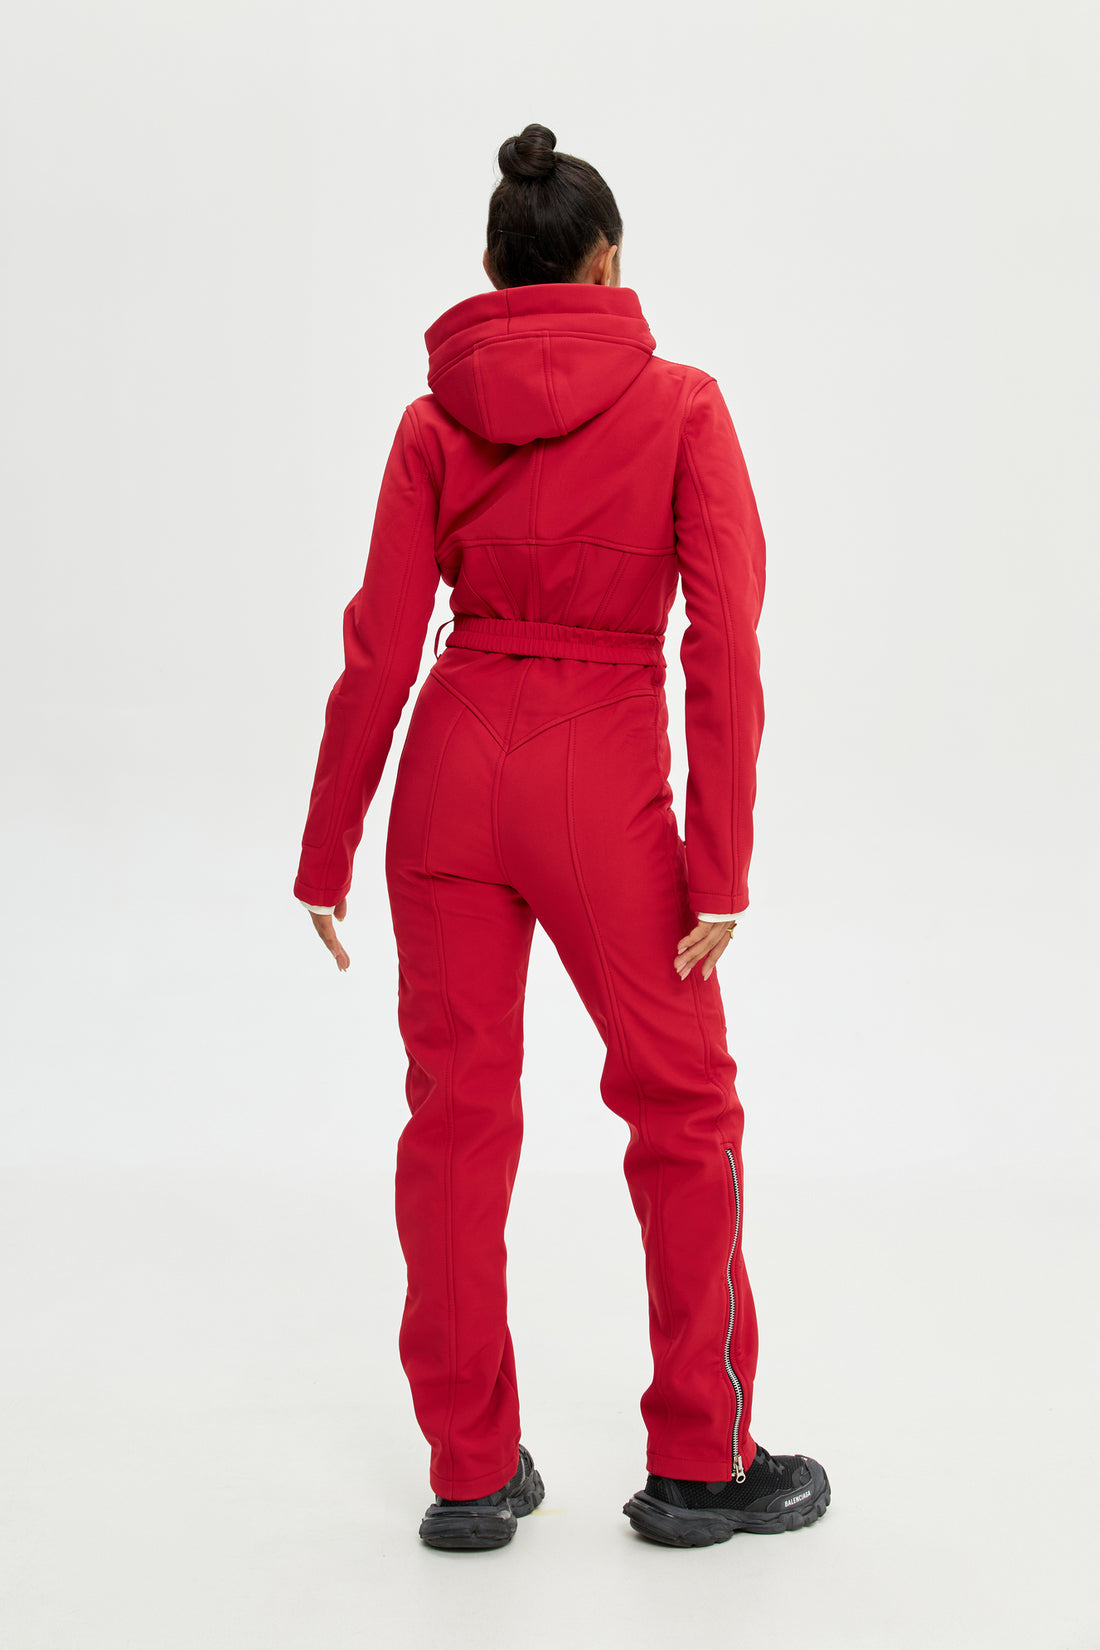 Ski suit with slim pants TABLE - RED Skinny ski suit for chic winter vacation outfit